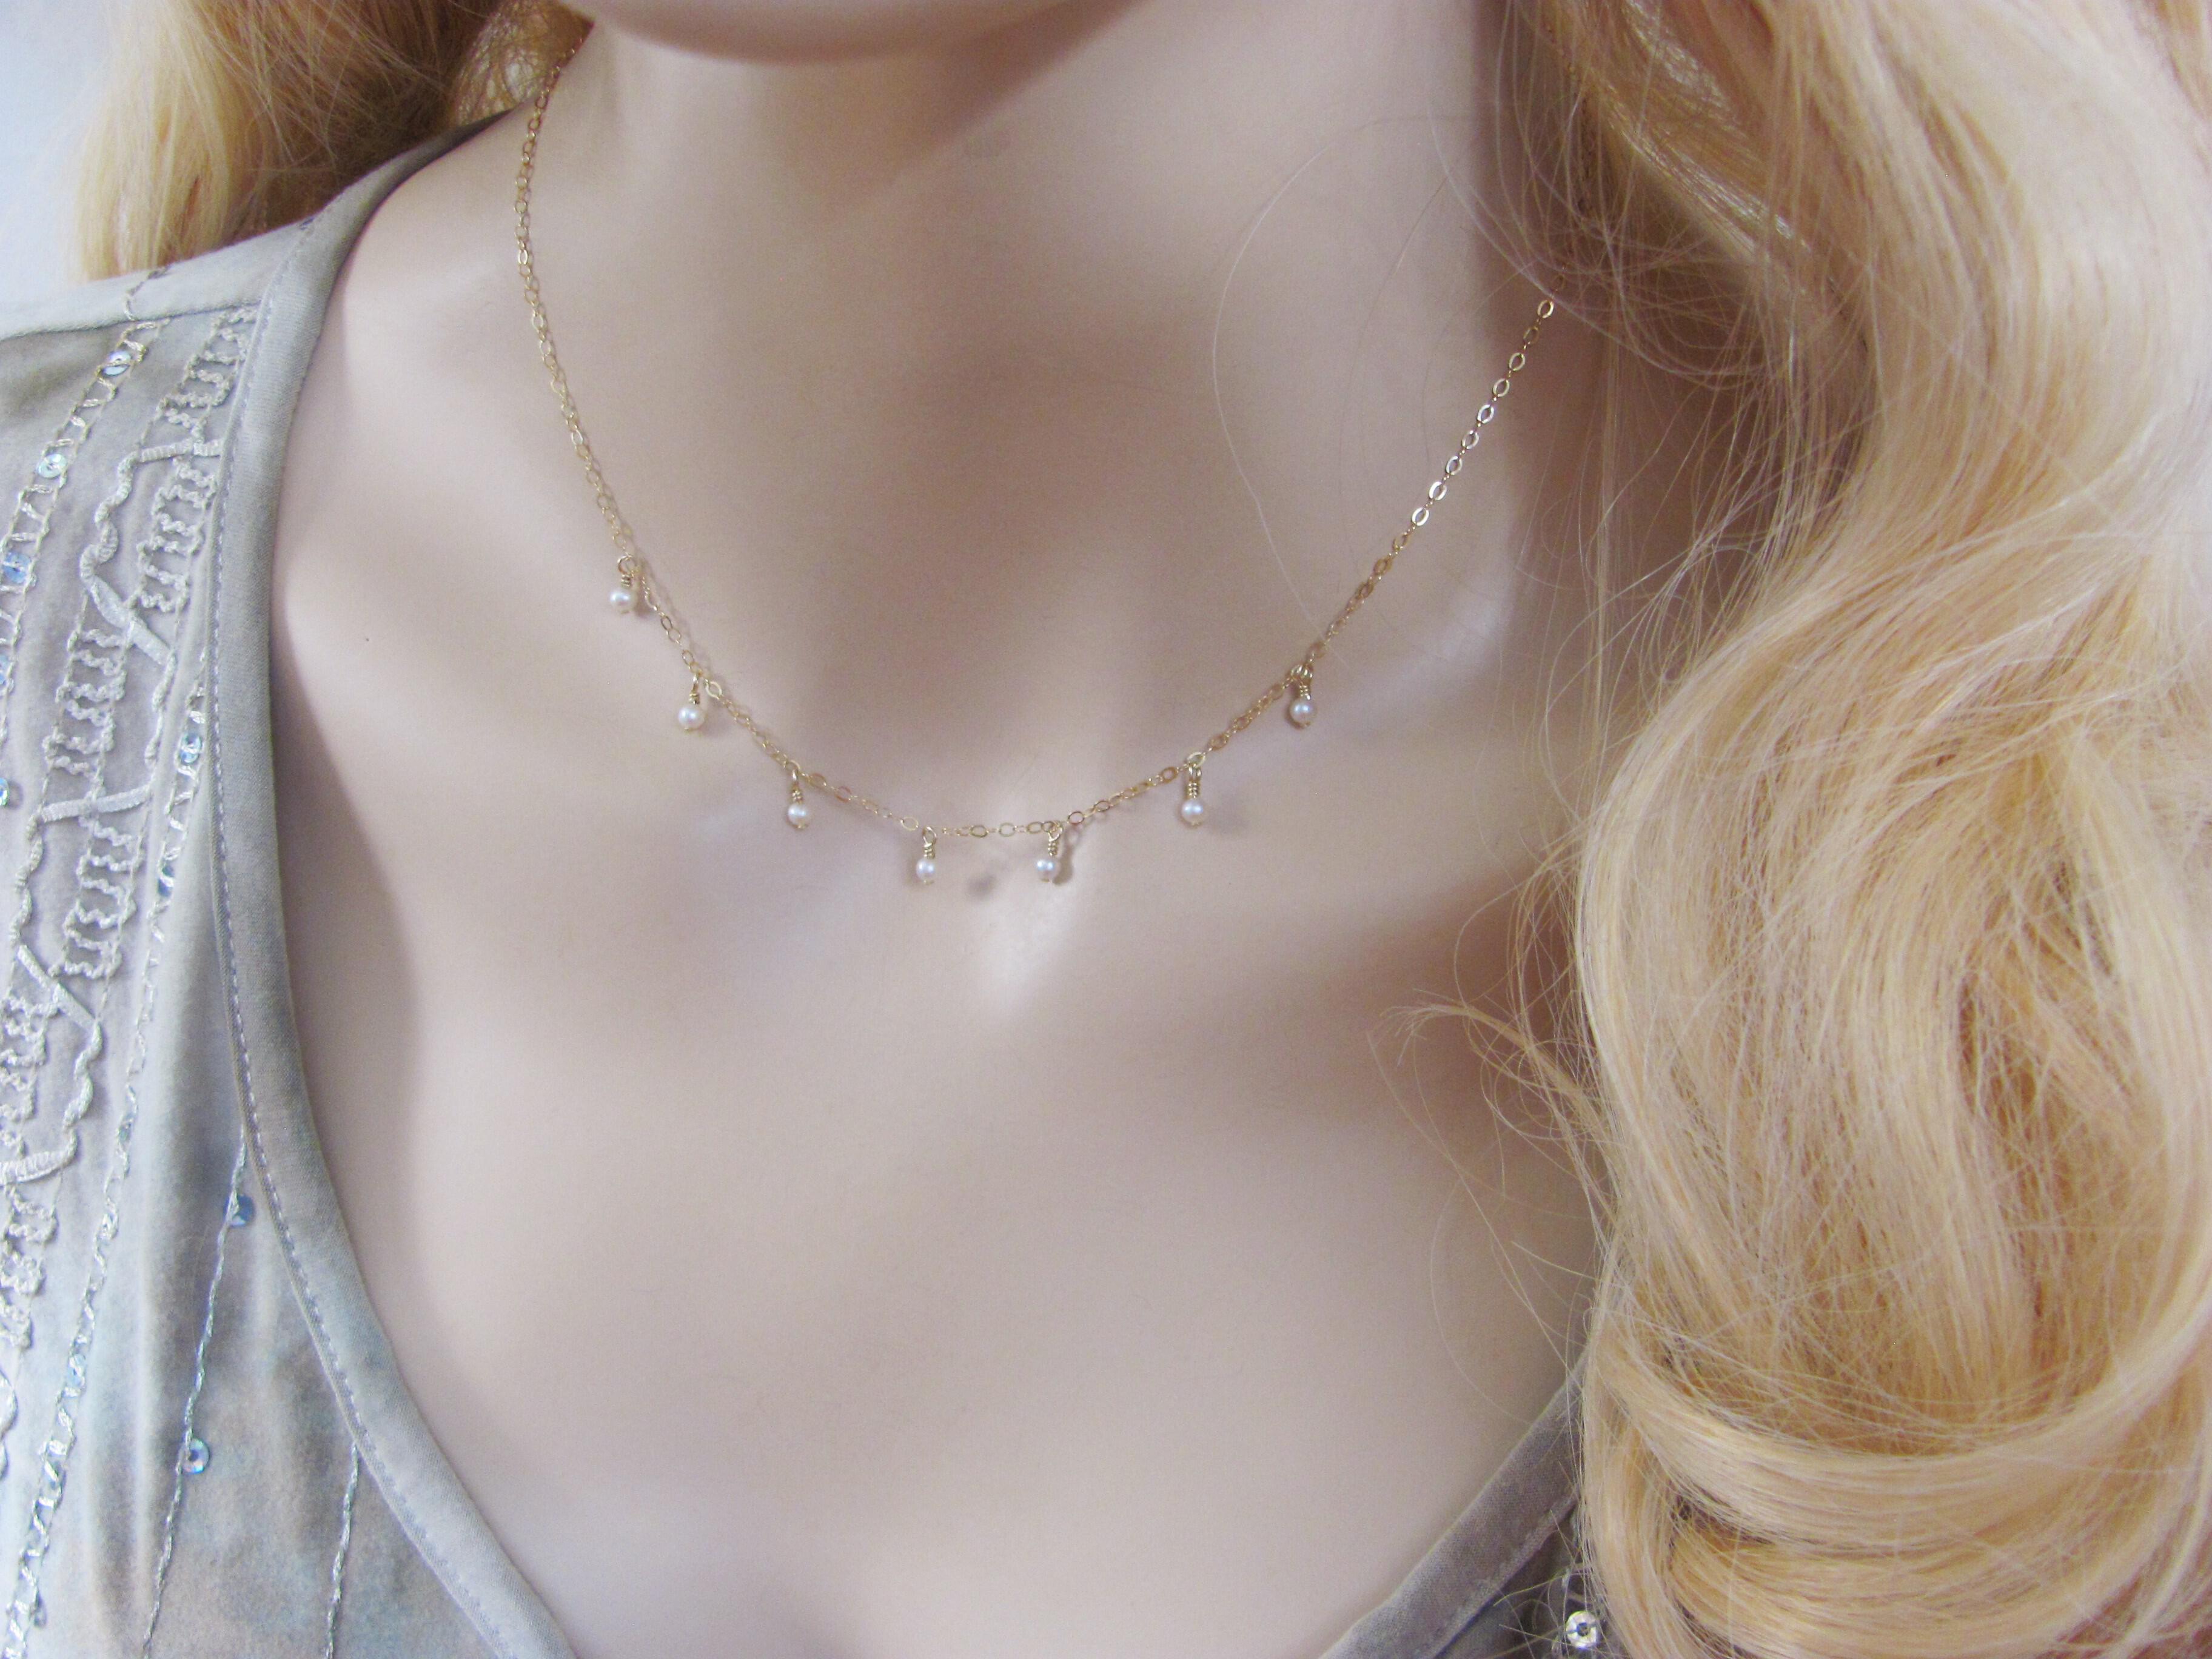 Dangling Pearl Choker Necklace in Gold or Sterling Silver